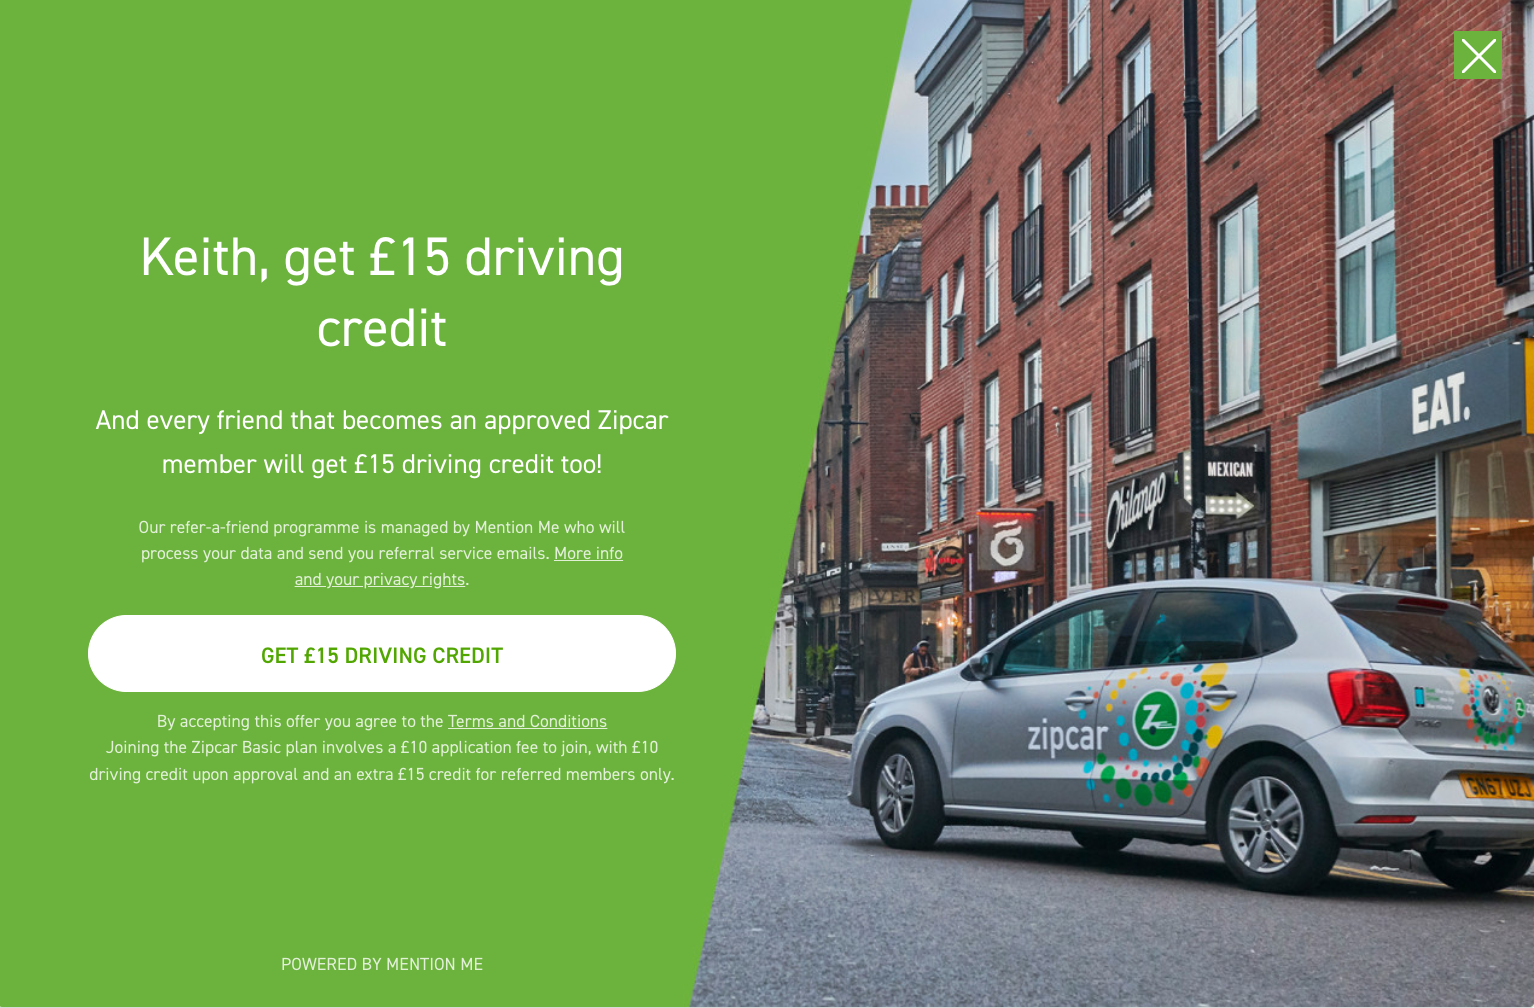 Zipcar refer-a-friend example